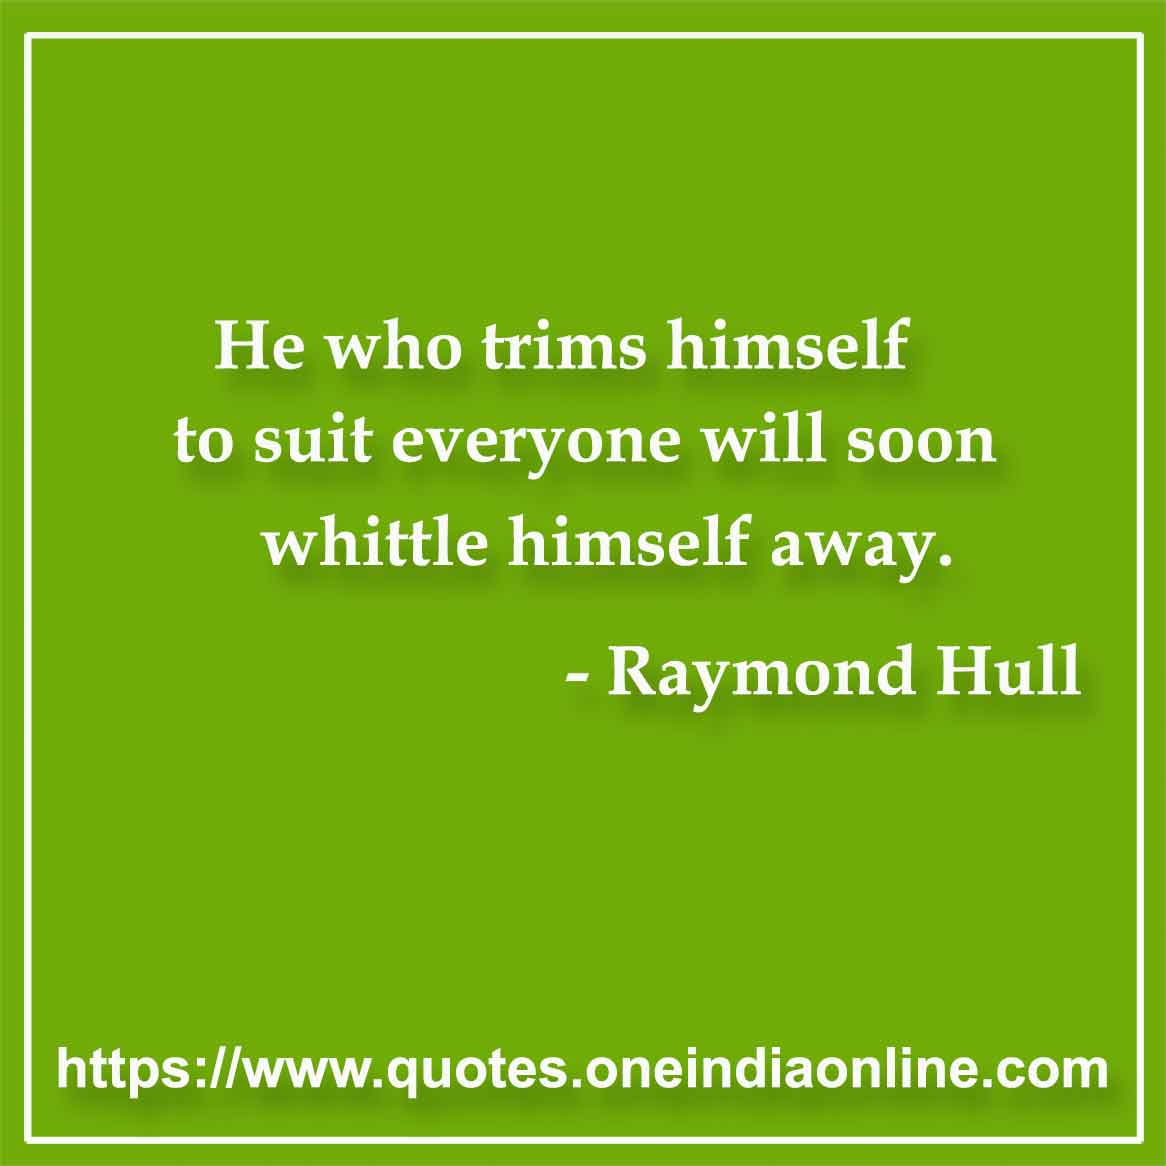 He who trims himself to suit everyone will soon whittle himself away.

- Raymond Hull